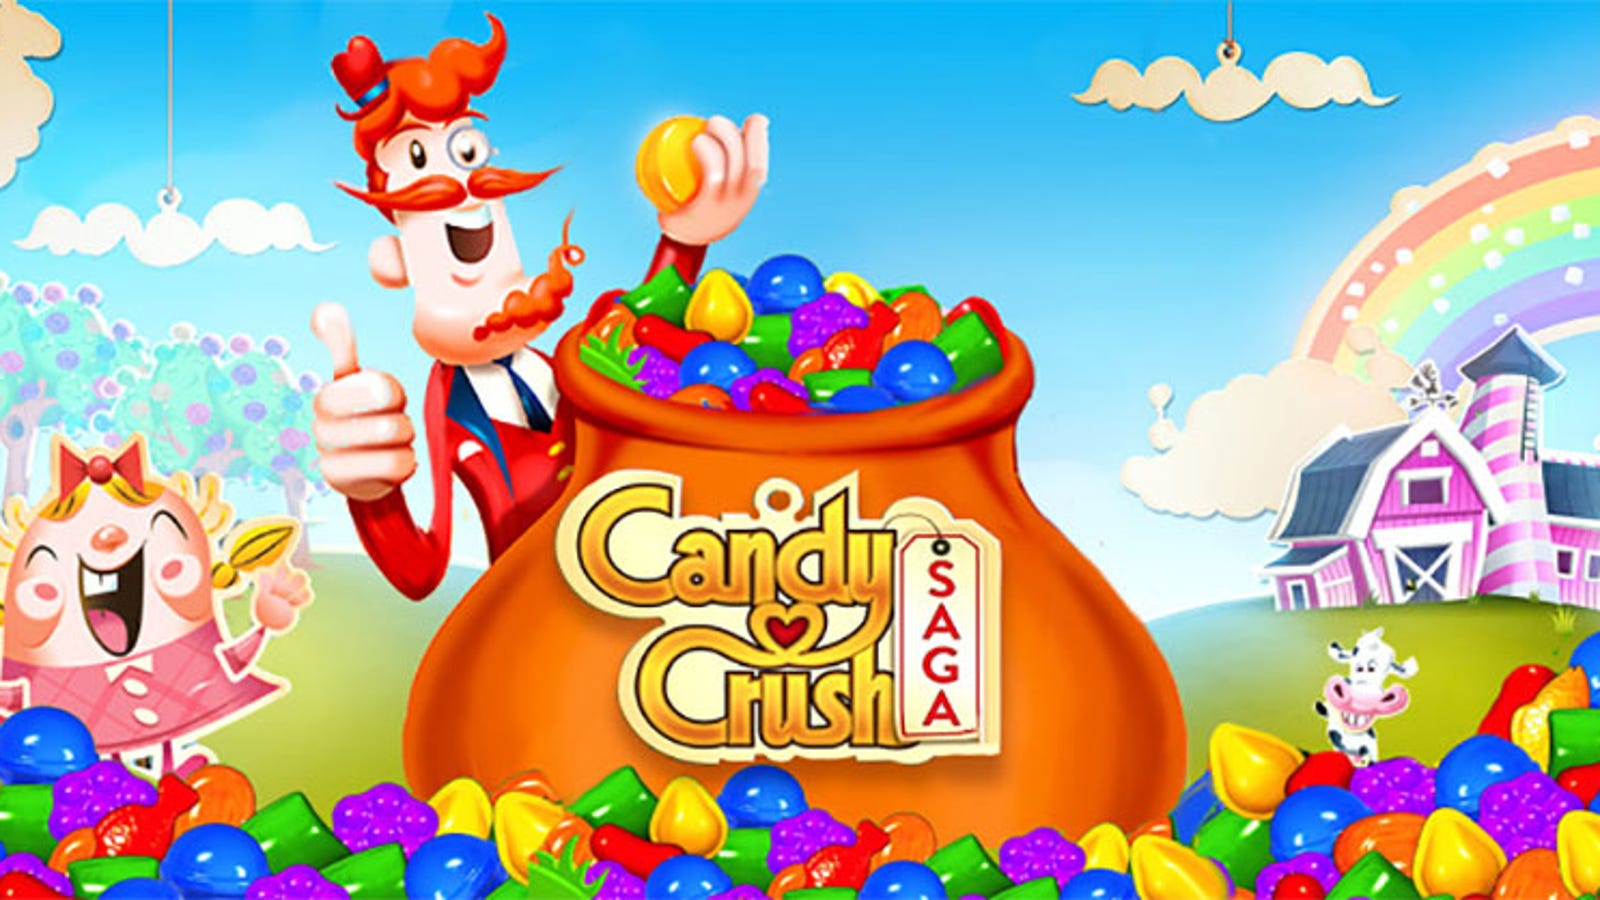 king candy crush online game